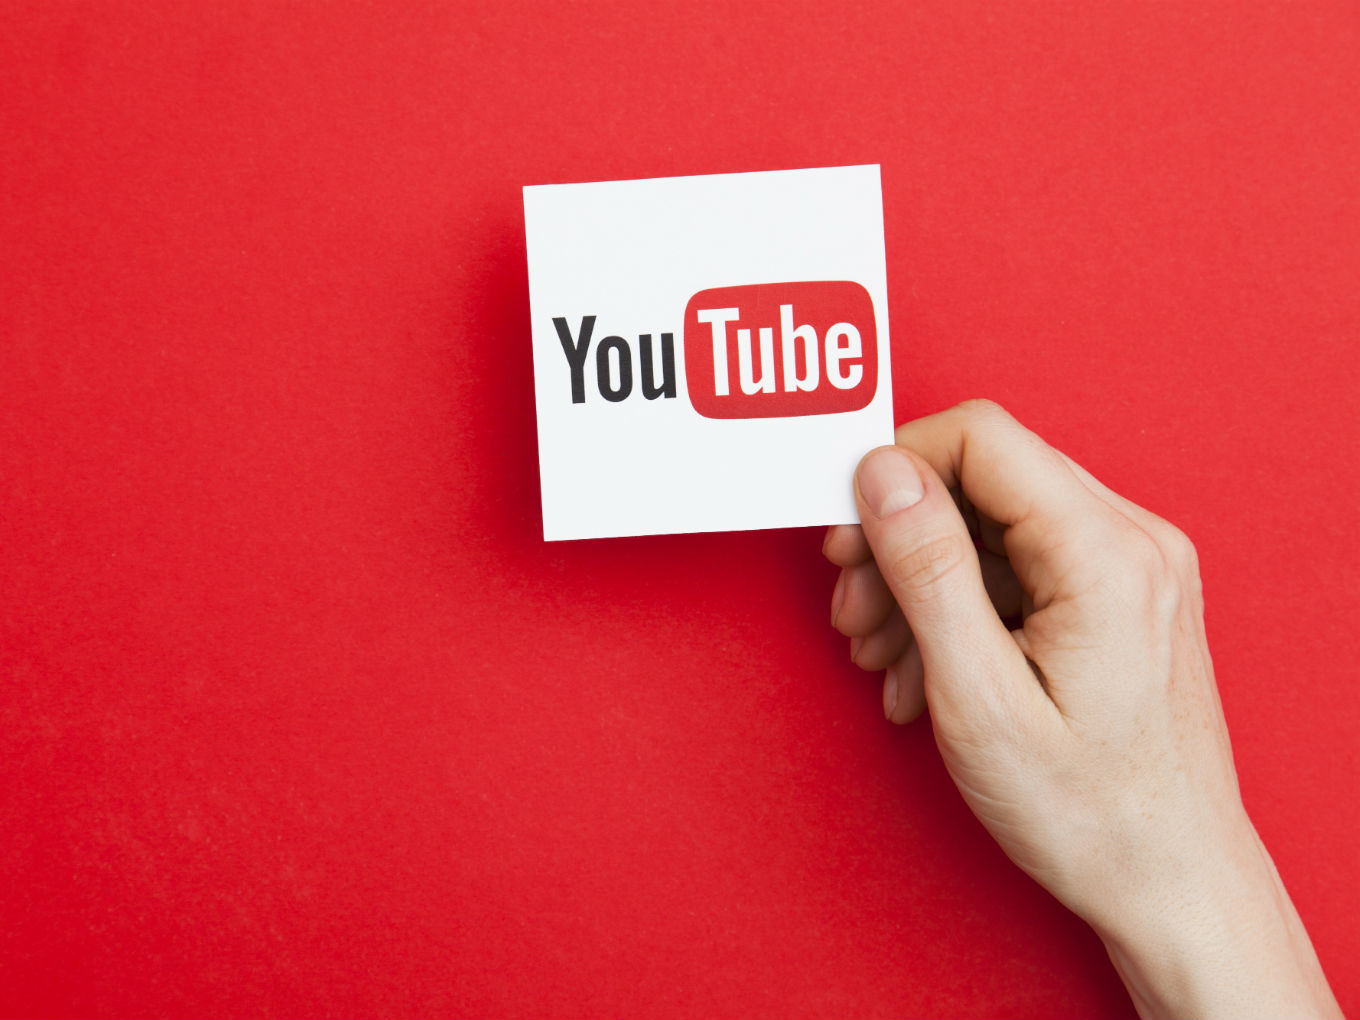 YouTube’s Short-Video Feature ‘Shorts’